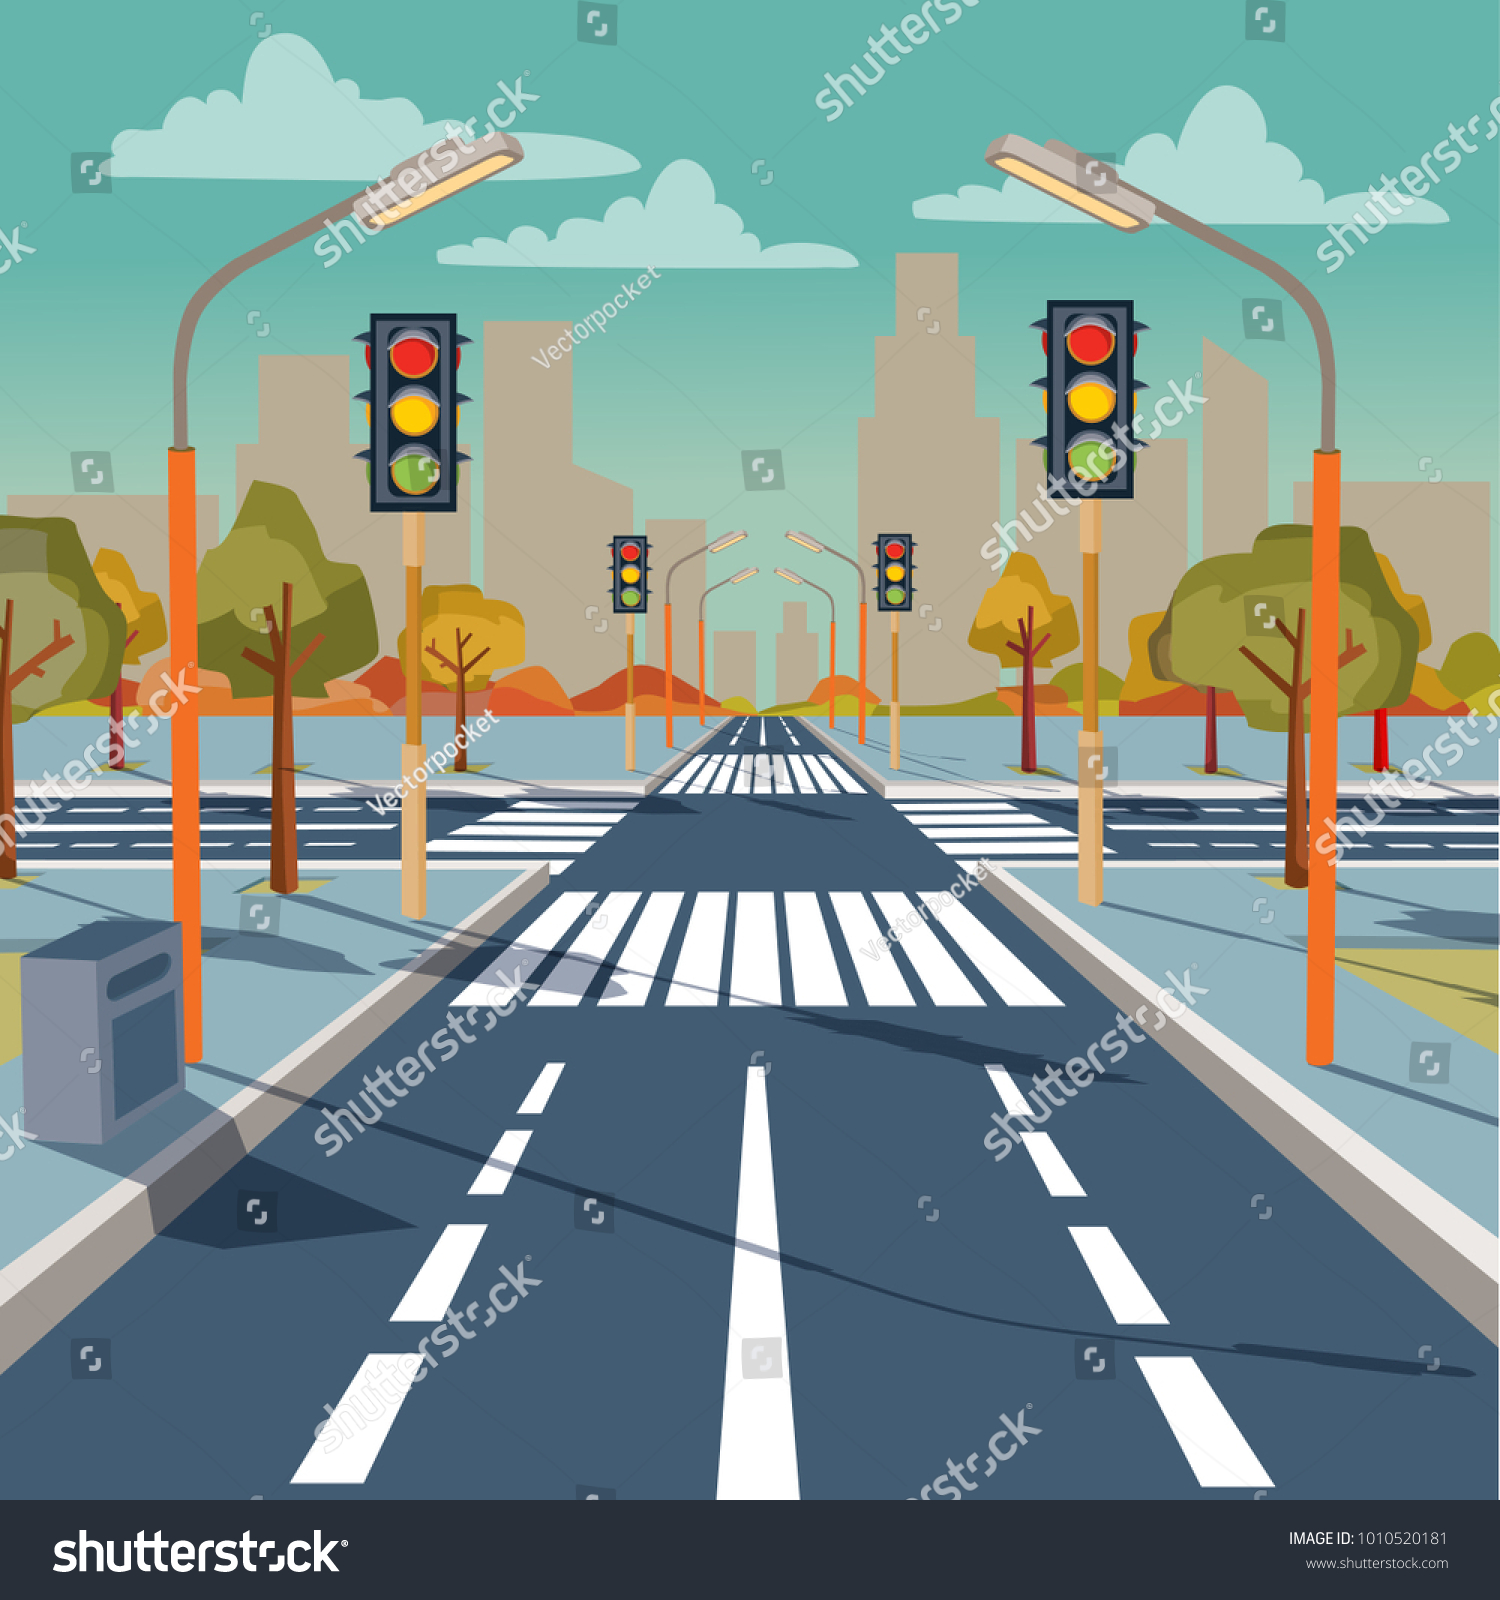 Vector illustration of city crossroad with traffic lights, road markings, sidewalk for pedestrians, without any cars and people. Cityscape, empty street, highway, urban concept in flat style #1010520181